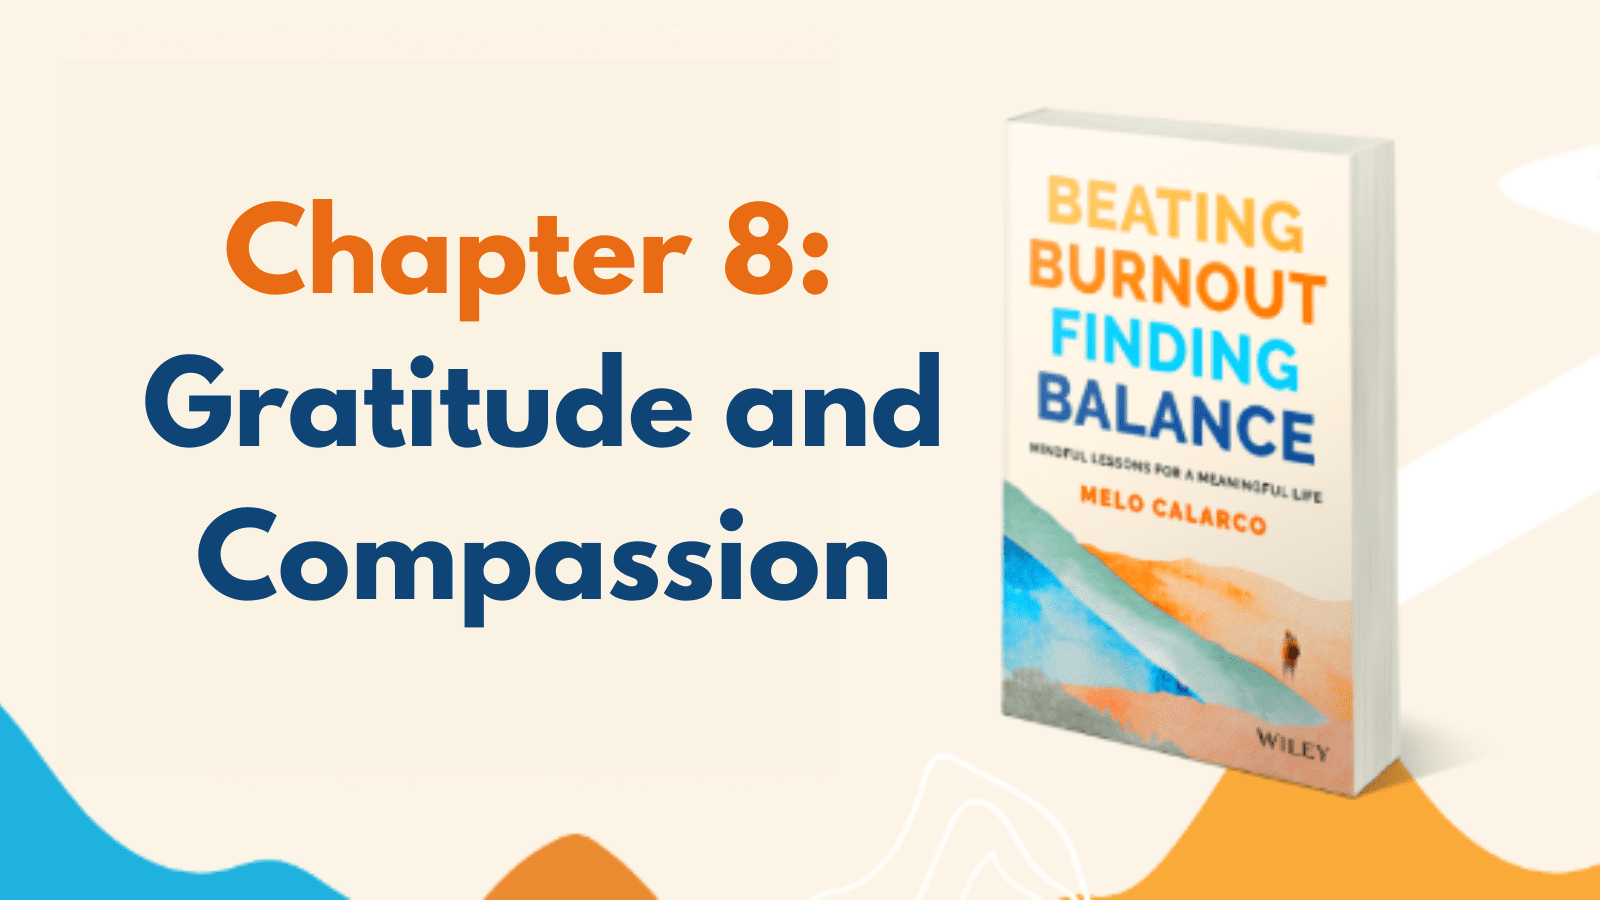 Chapter 8: Gratitude and Compassion